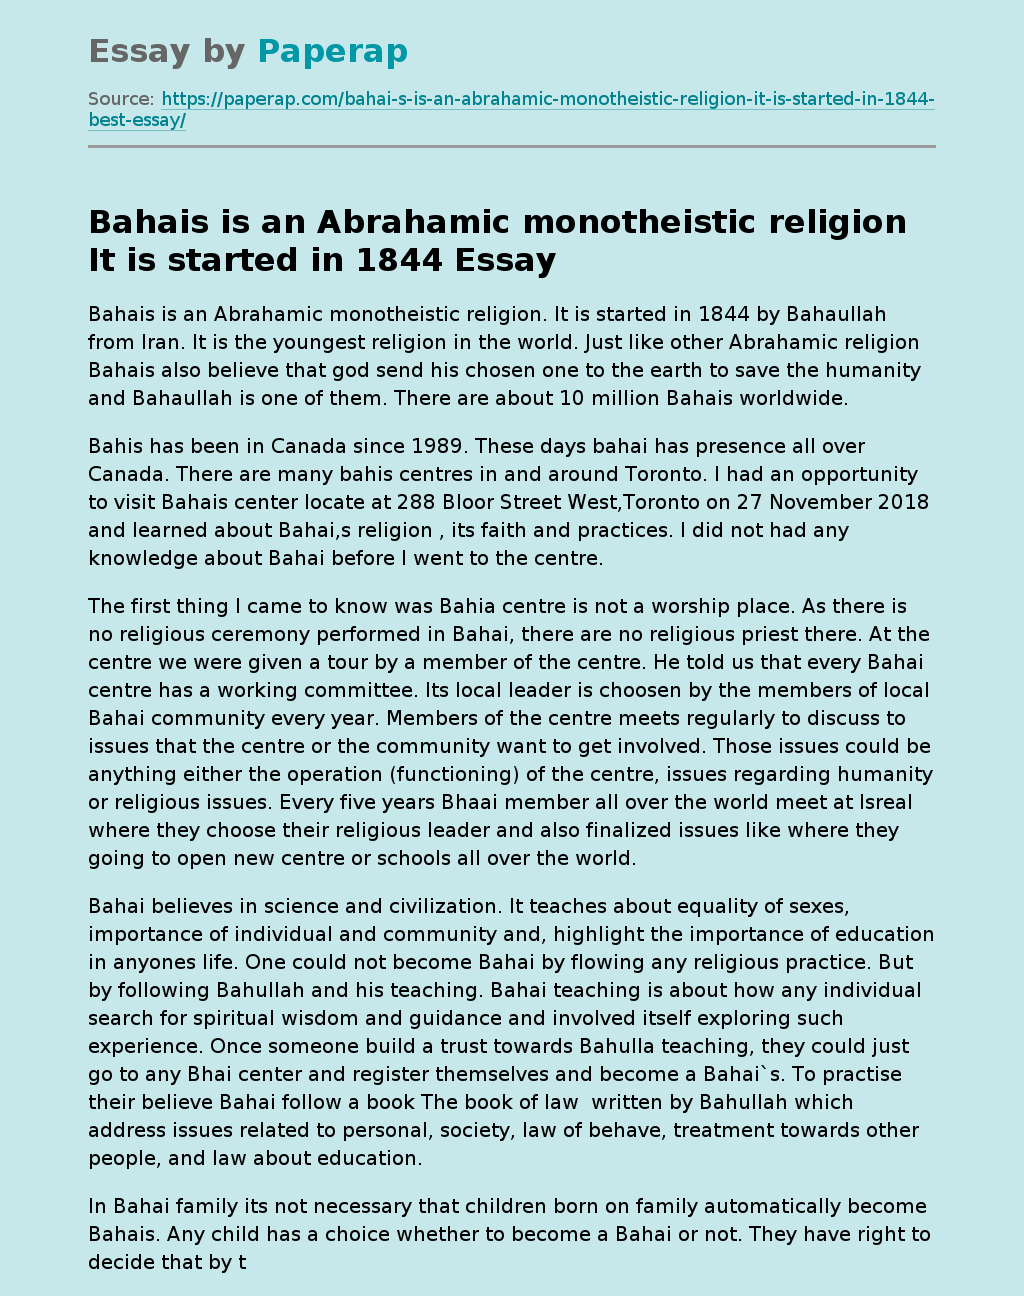 Bahais Is an Abrahamic Monotheistic Religion